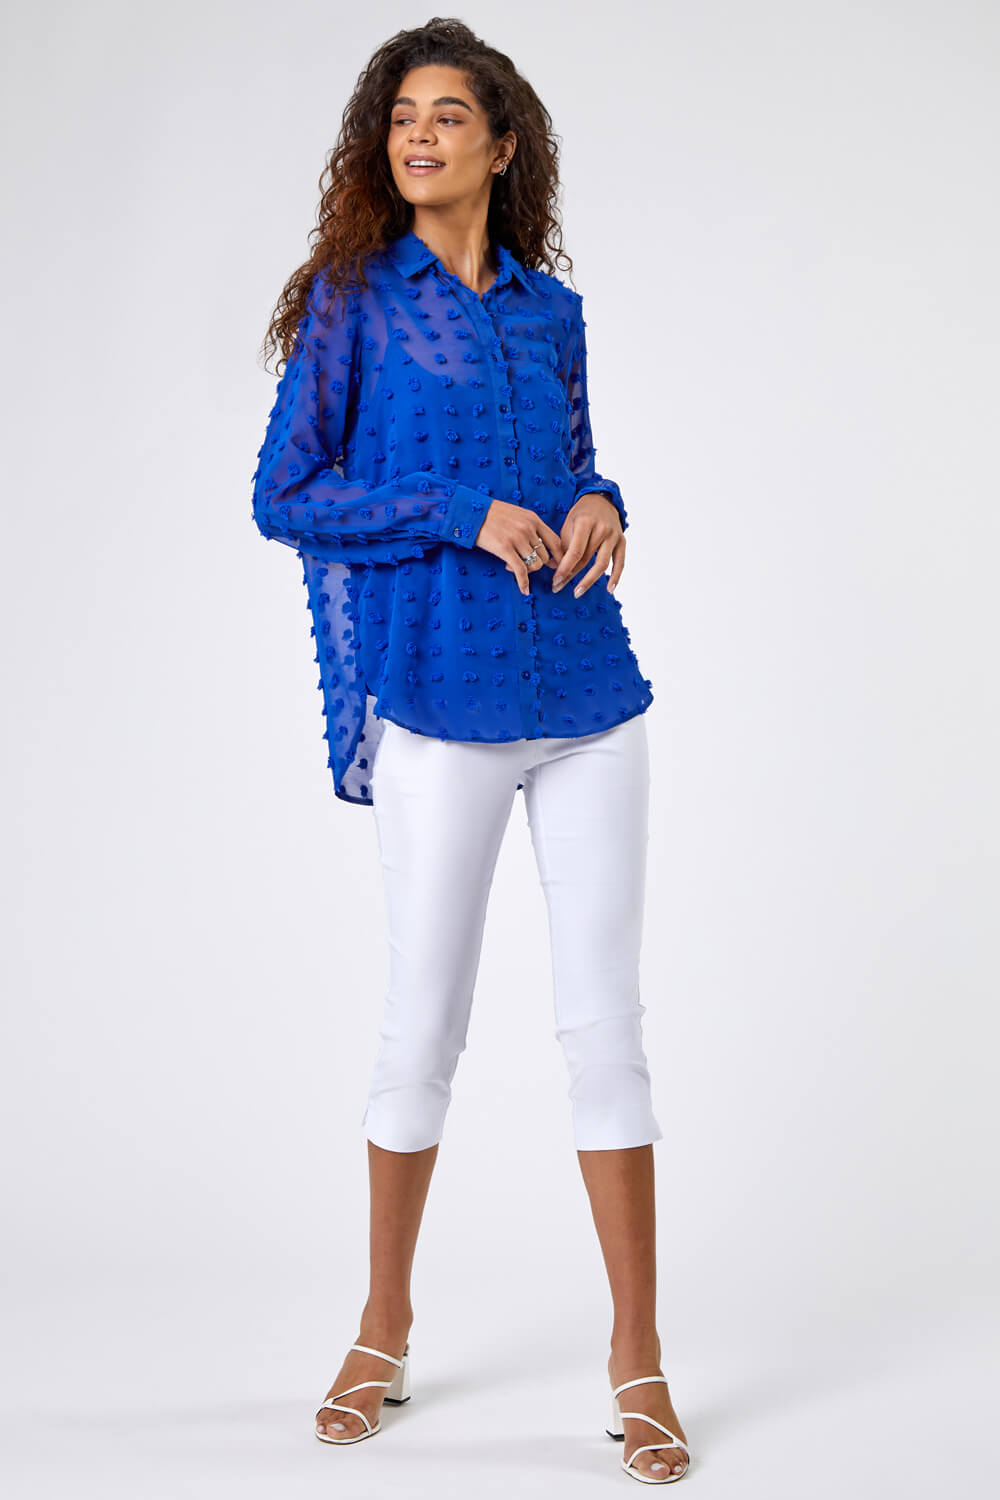 Royal Blue Textured Spot Button Up Blouse, Image 3 of 5